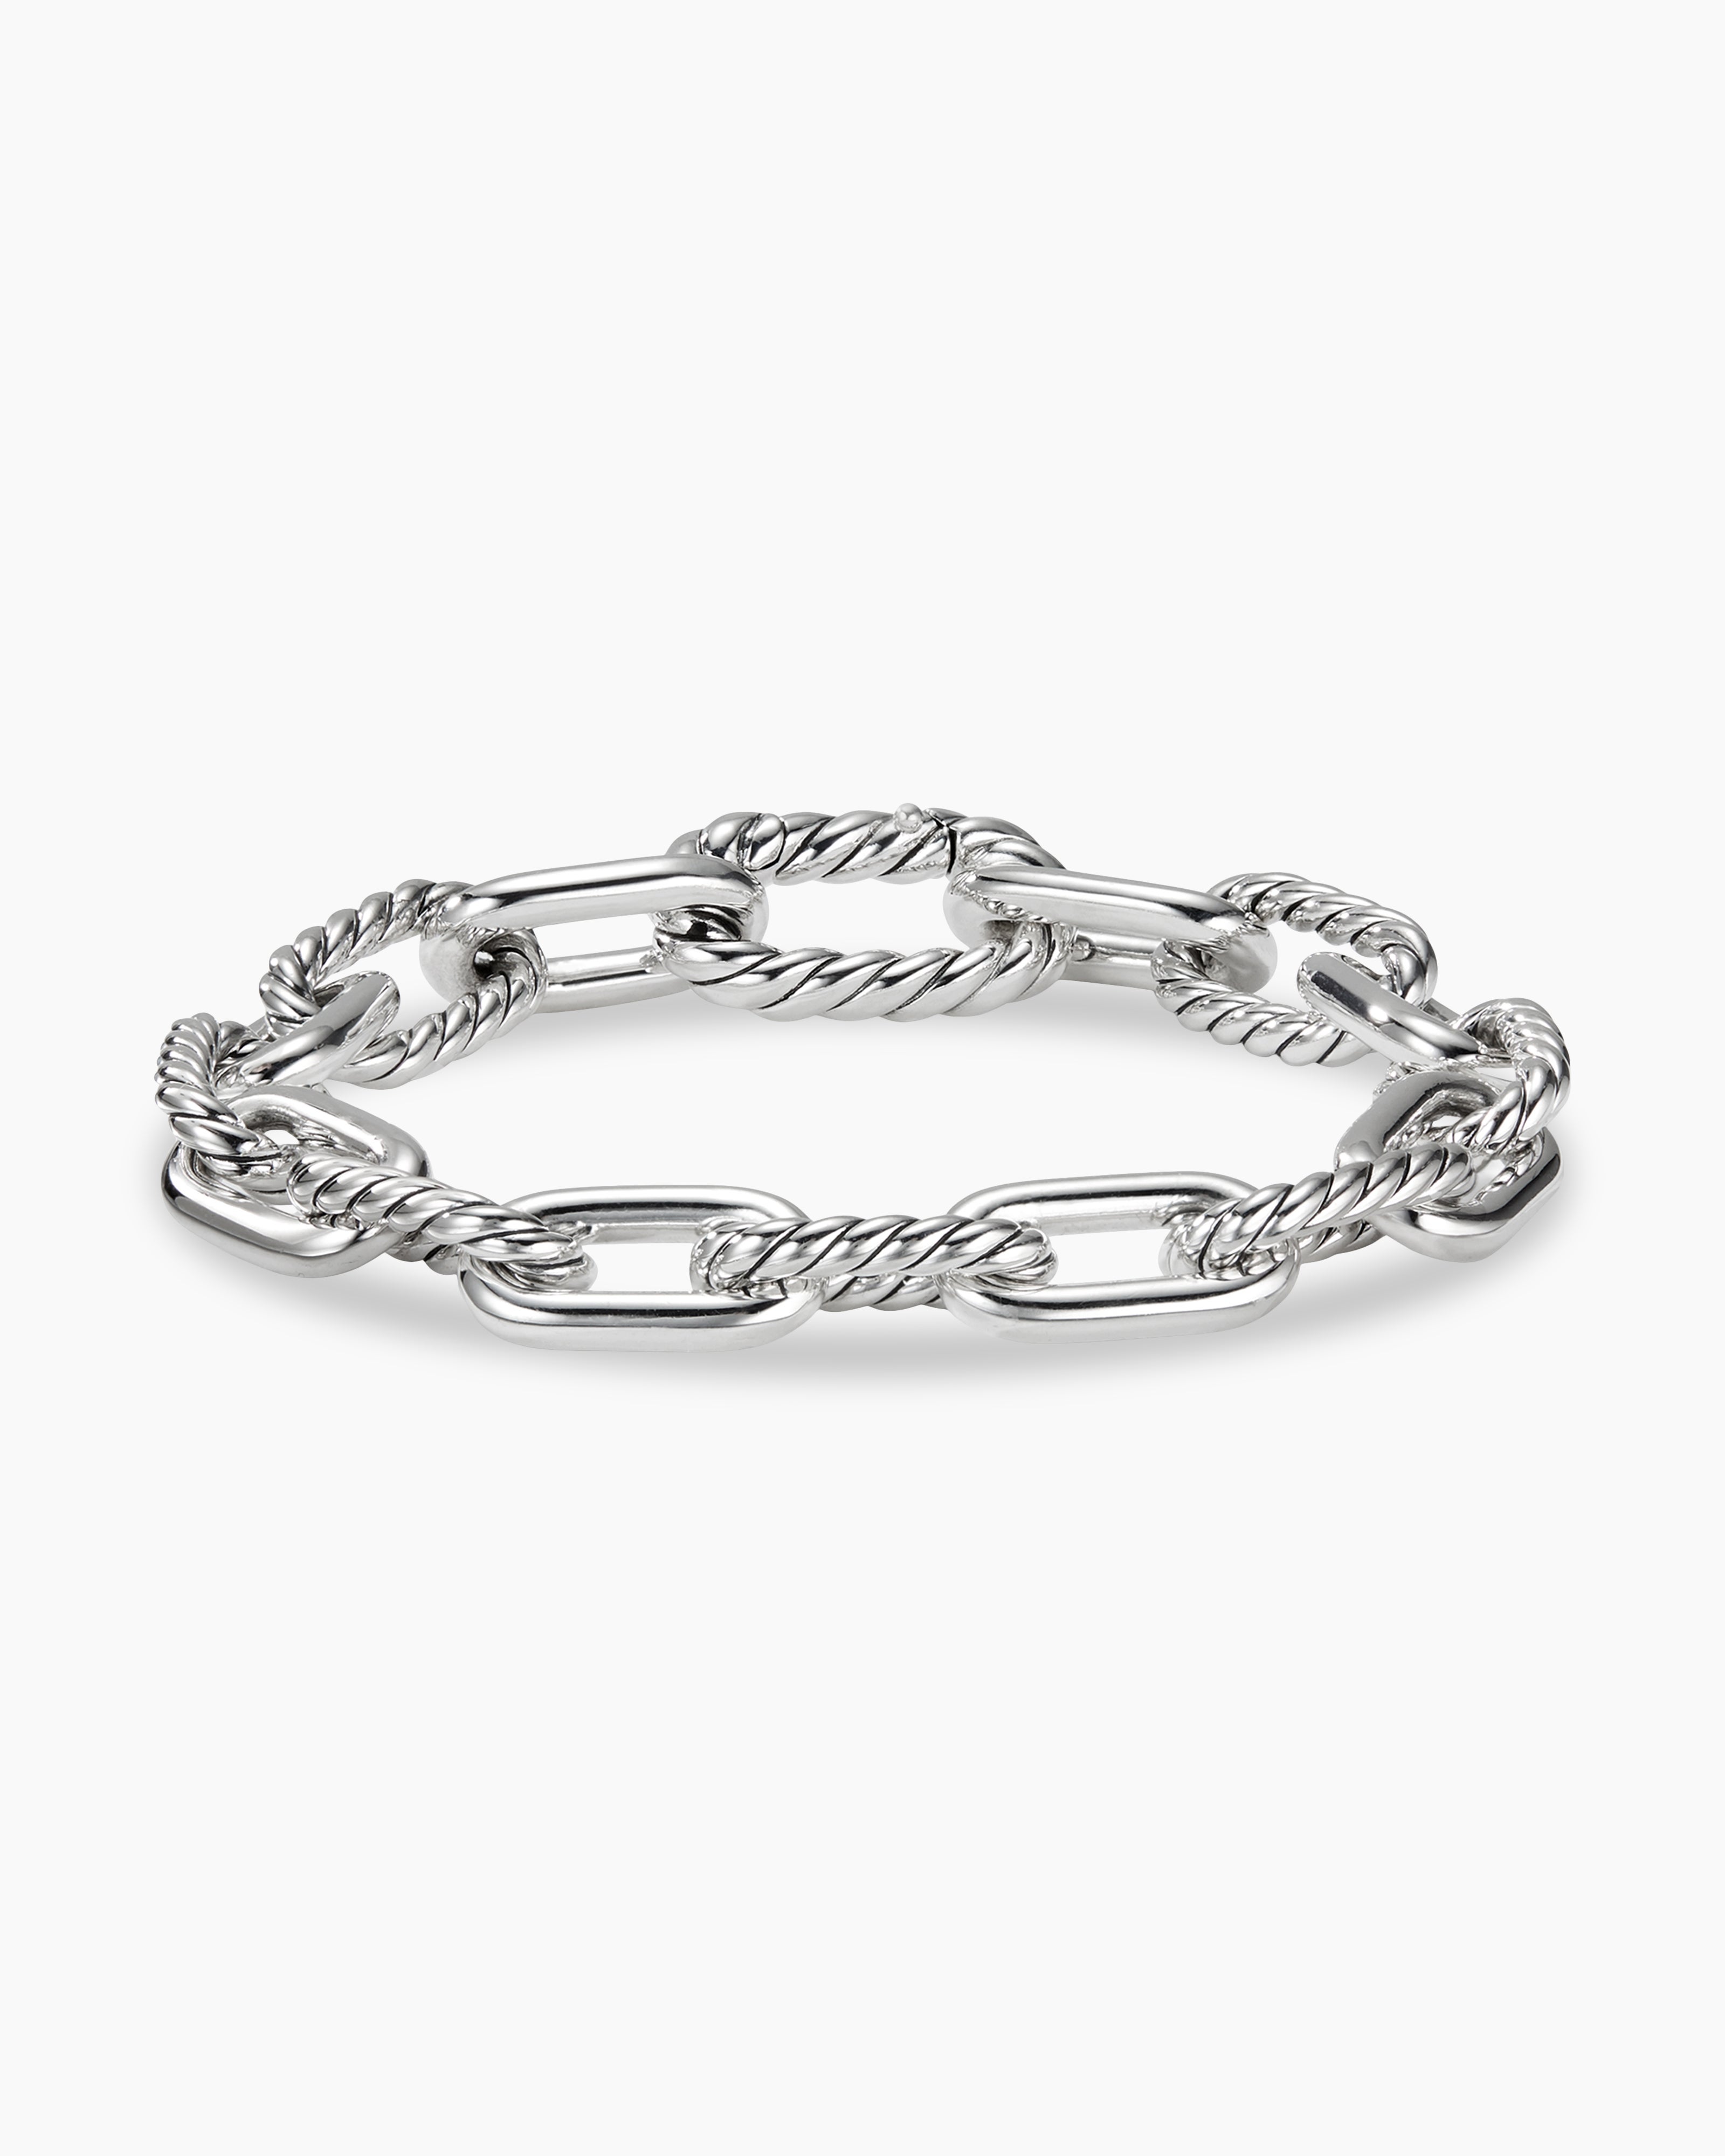 Silver Chain Bracelet for Men and Boys – Welcome to Rani Alankar